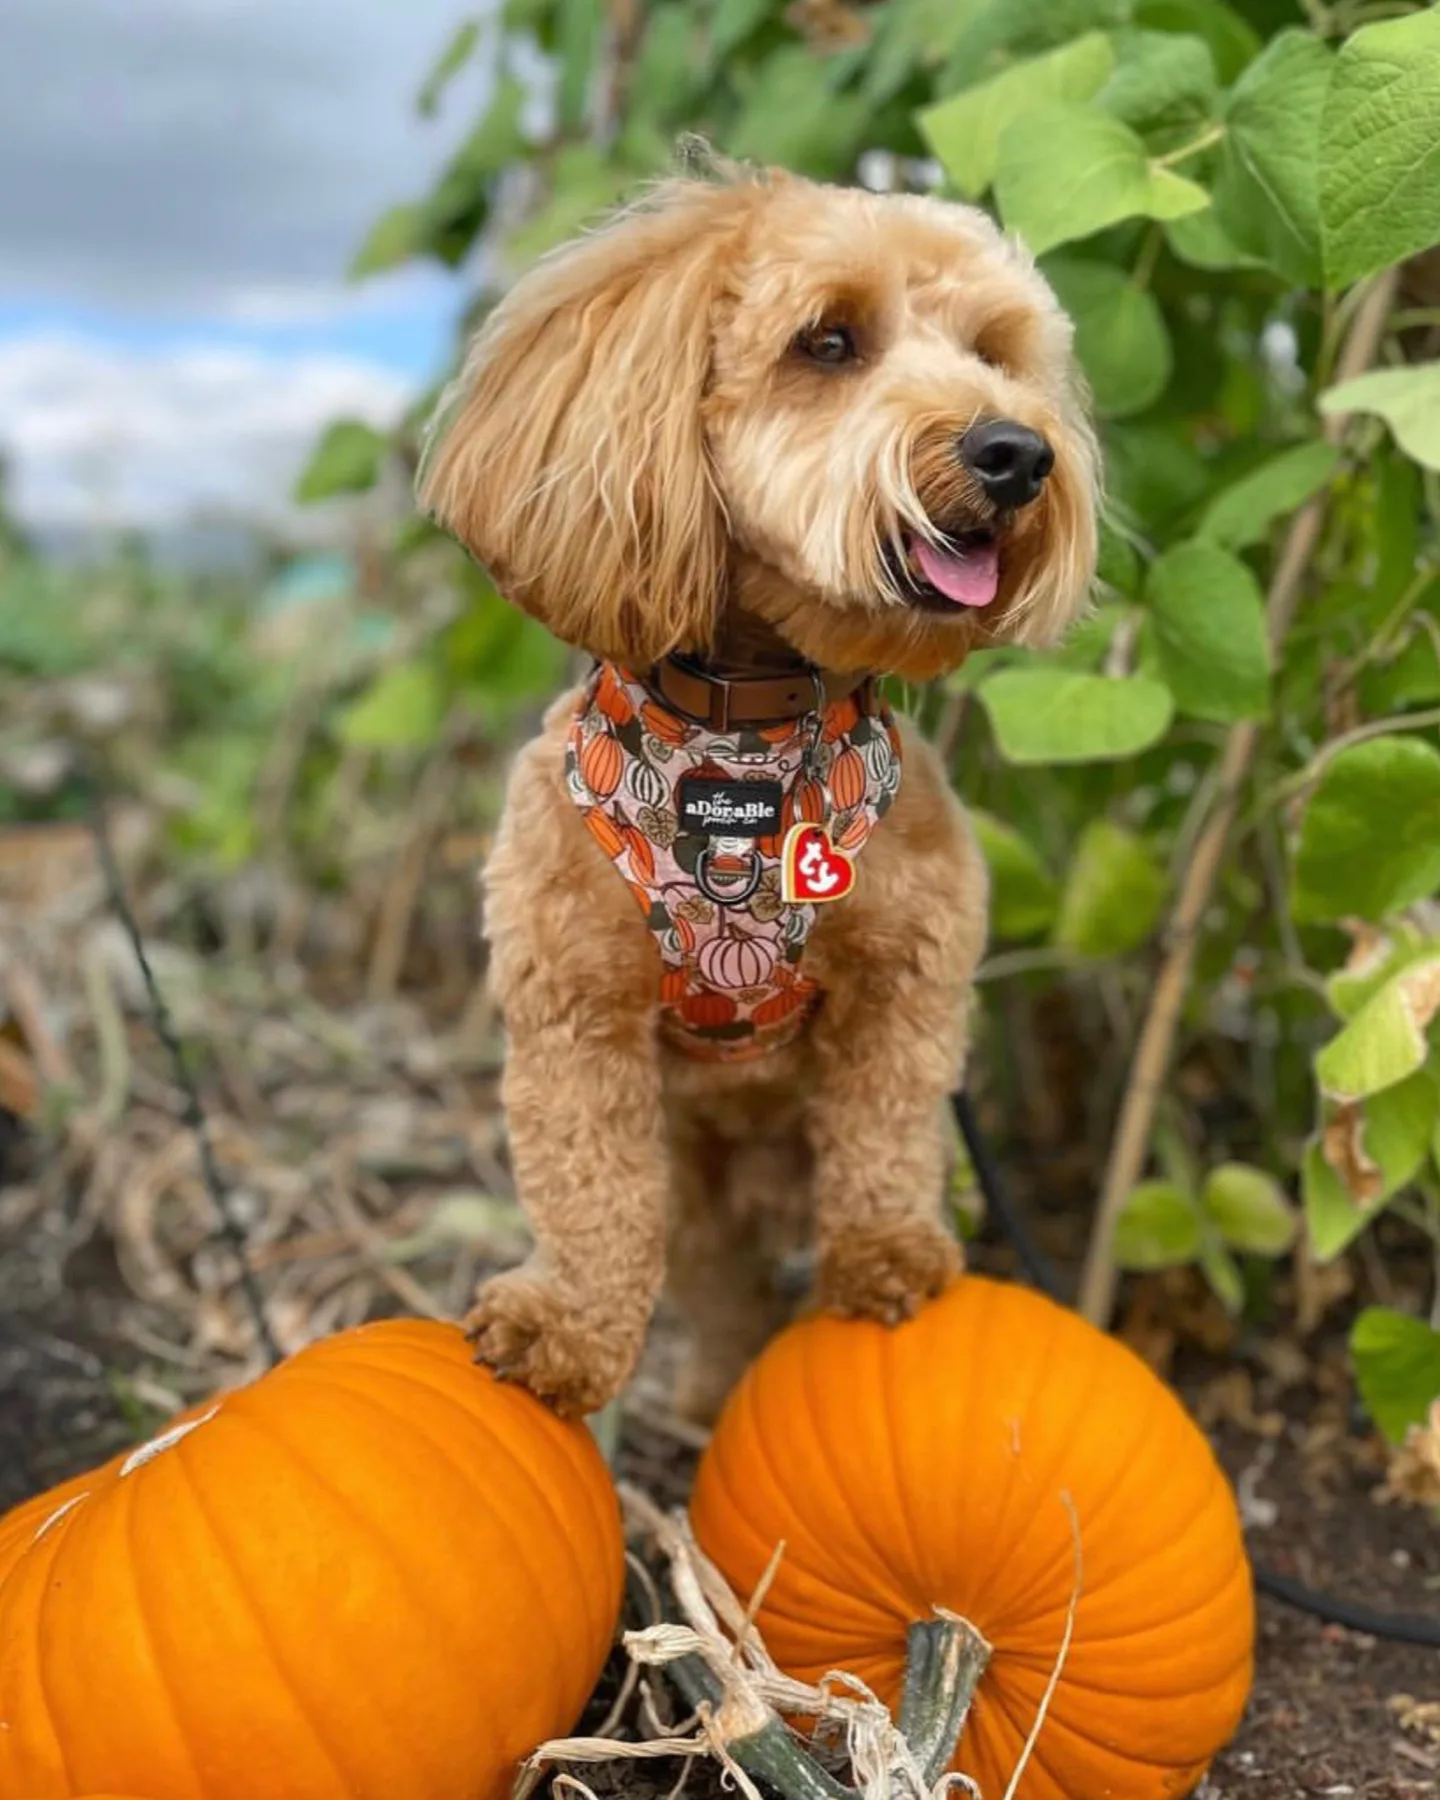 A Cavapoo dog and two pumpkins 